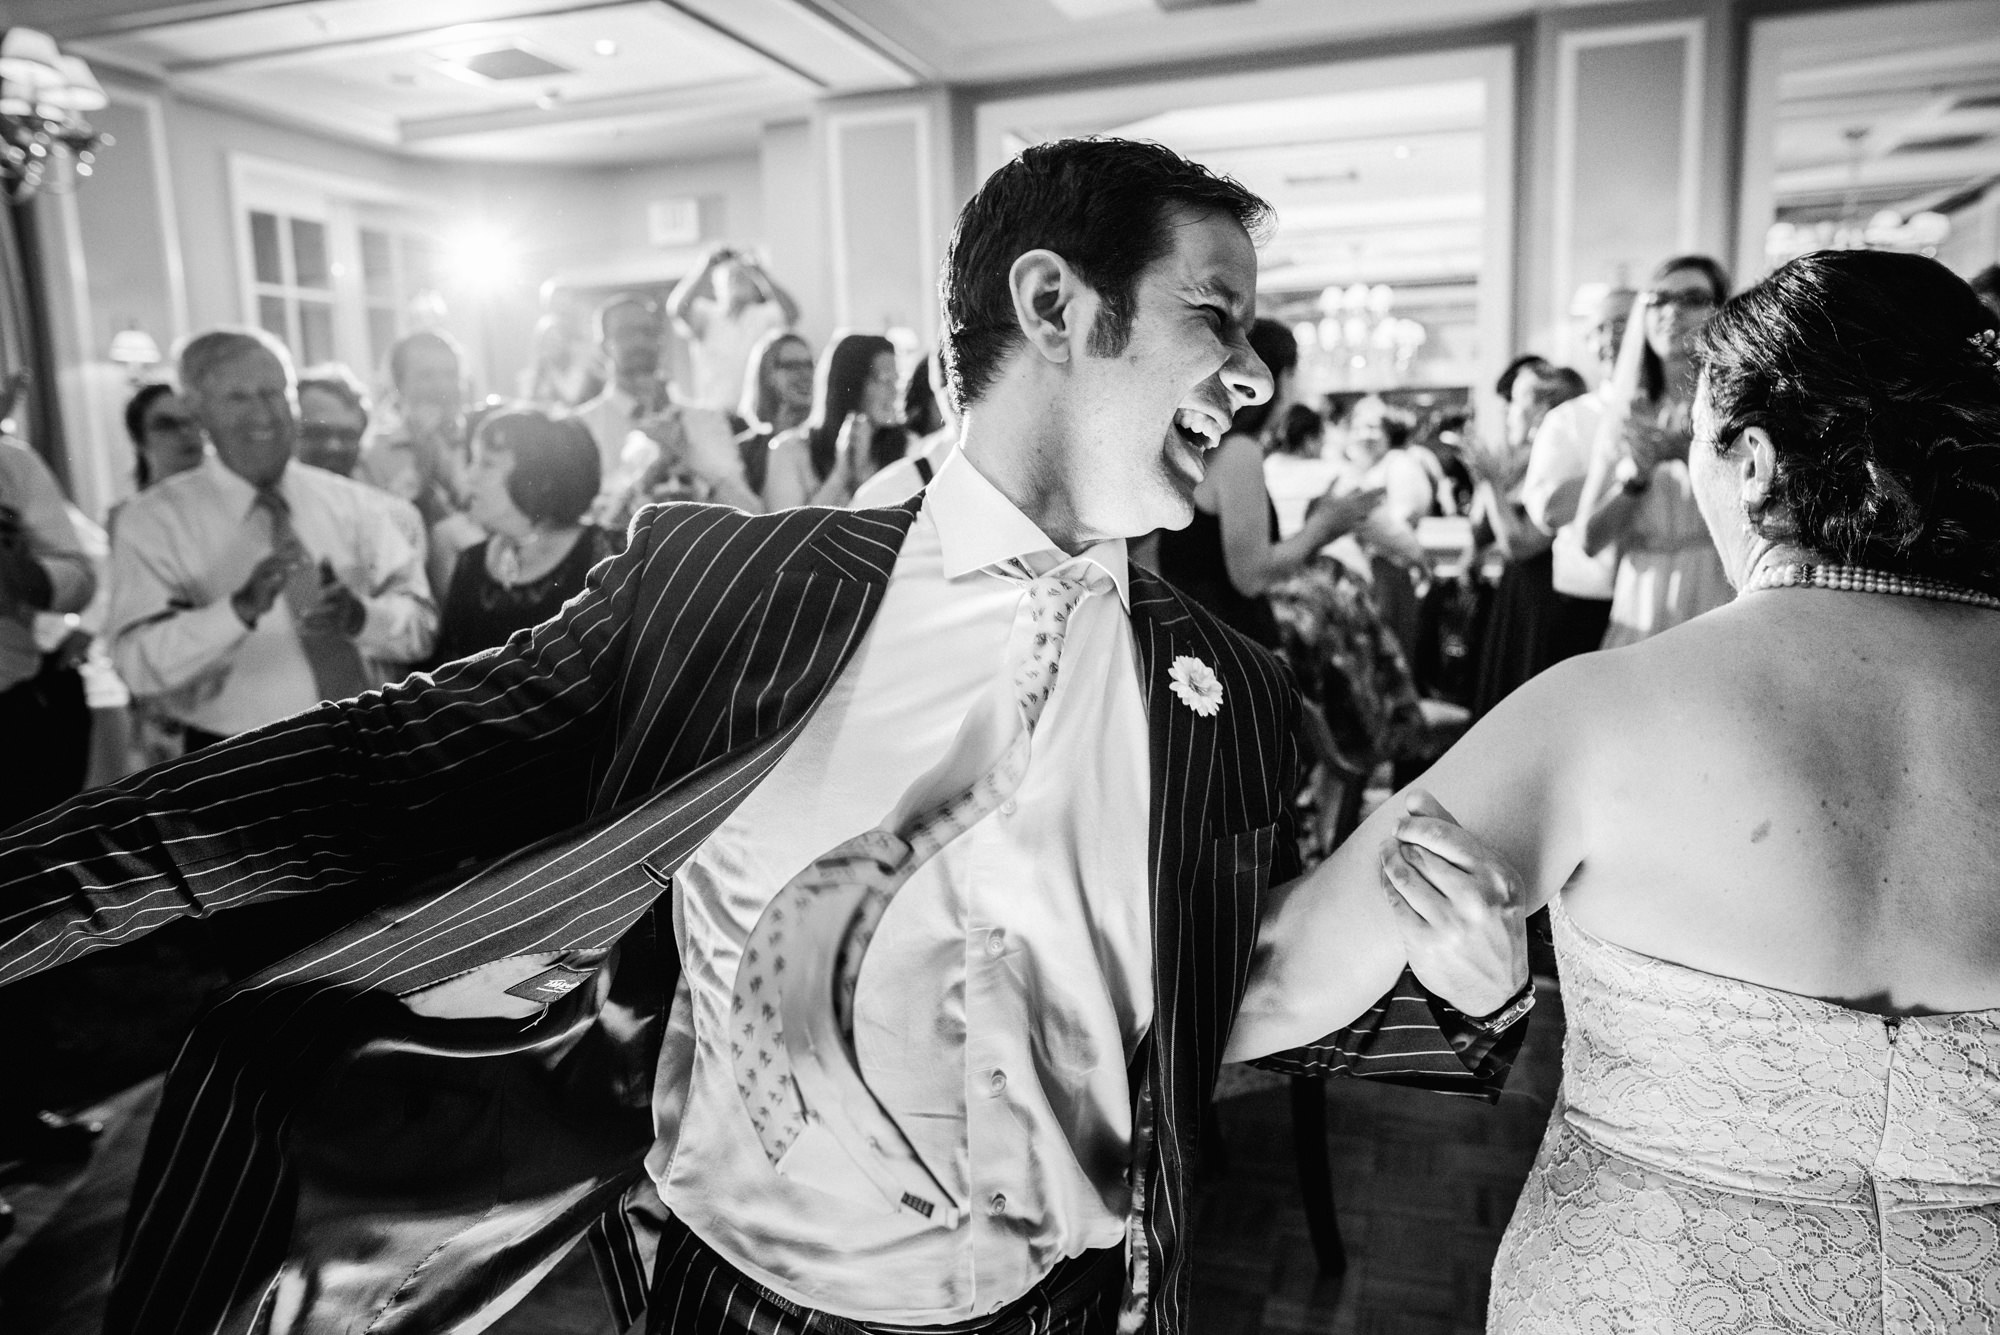 Joelle dances the horah with a cousin at her wedding reception at the Seattle Tennis Club, Summer 2016. Photo by Seattle Wedding Photographers Jennifer Tai Photo Artistry.